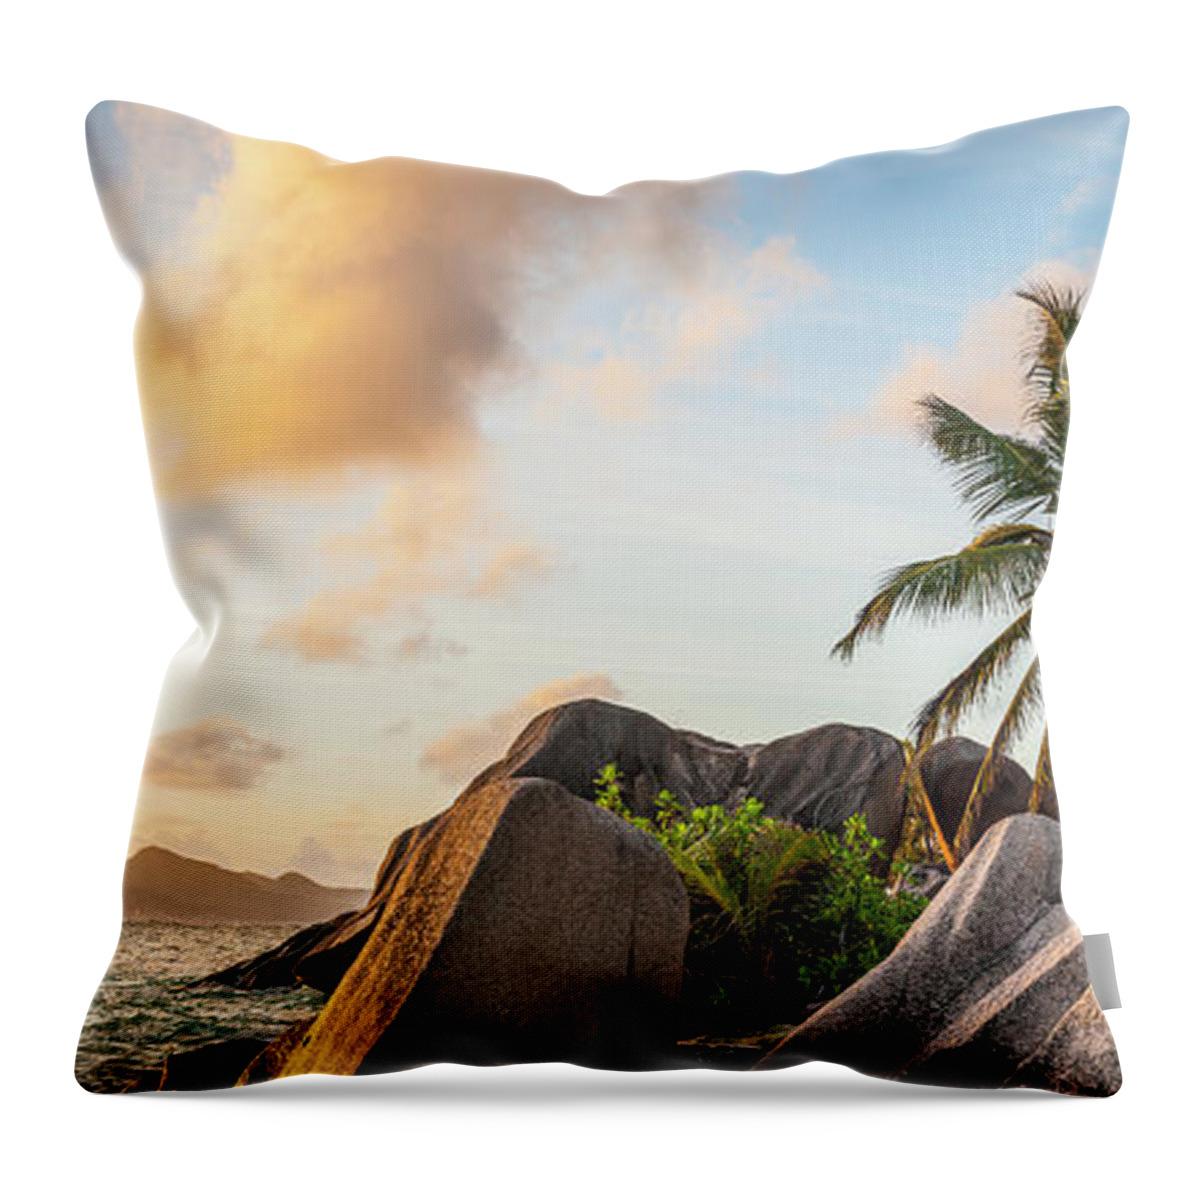 Tropical Rainforest Throw Pillow featuring the photograph Idyllic Tropical Island Sunset Over by Fotovoyager